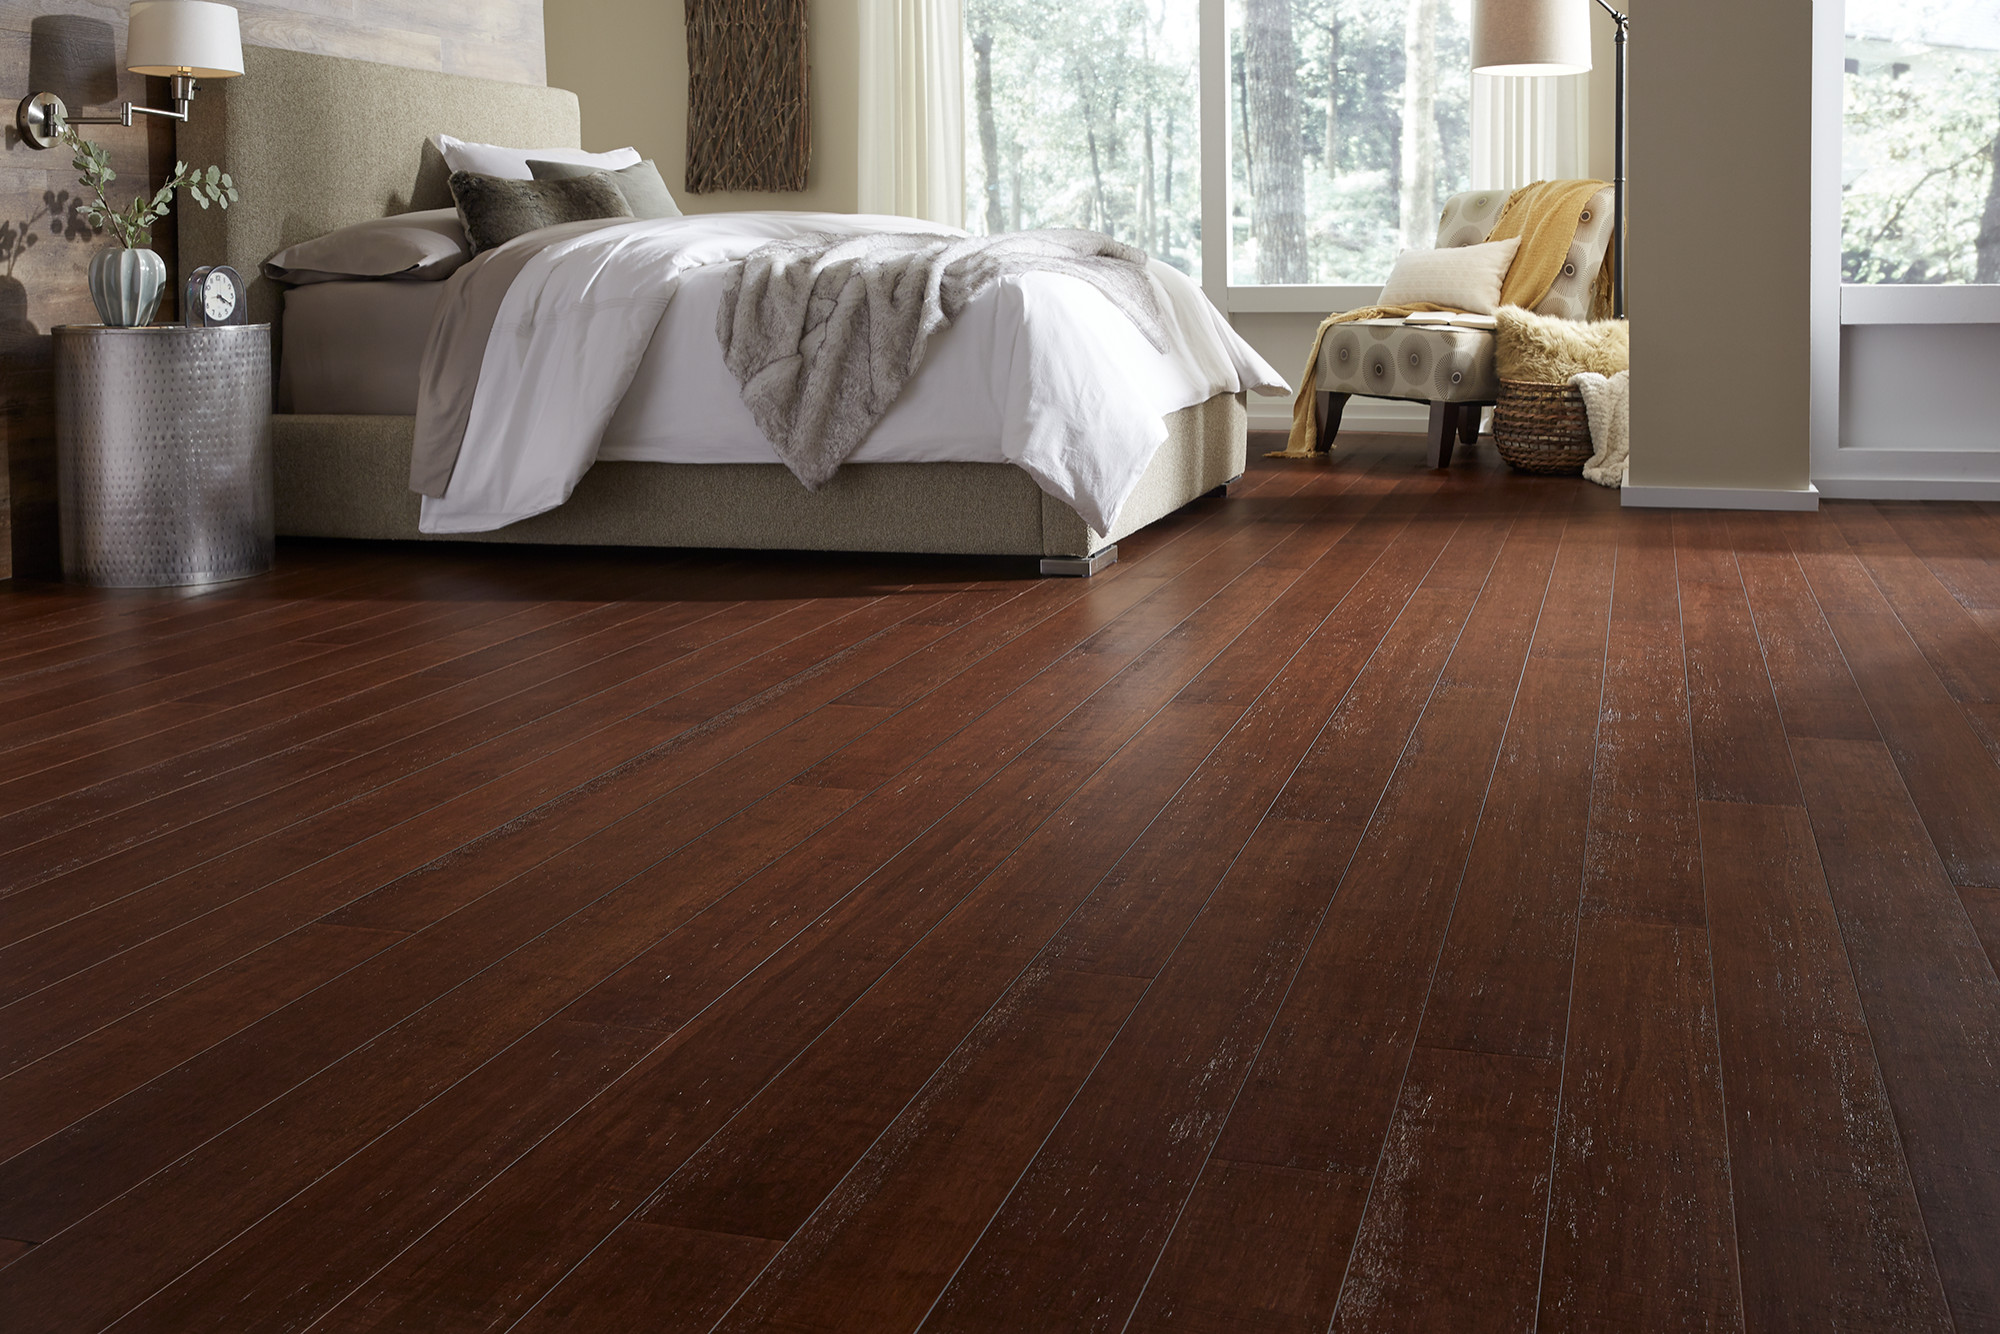 Morning Star Bamboo- 1/2" x 5-1/8" Warm Cognac Strand Stained Solid  Distress - Contemporary - Bedroom - Other - by LL Flooring | Houzz